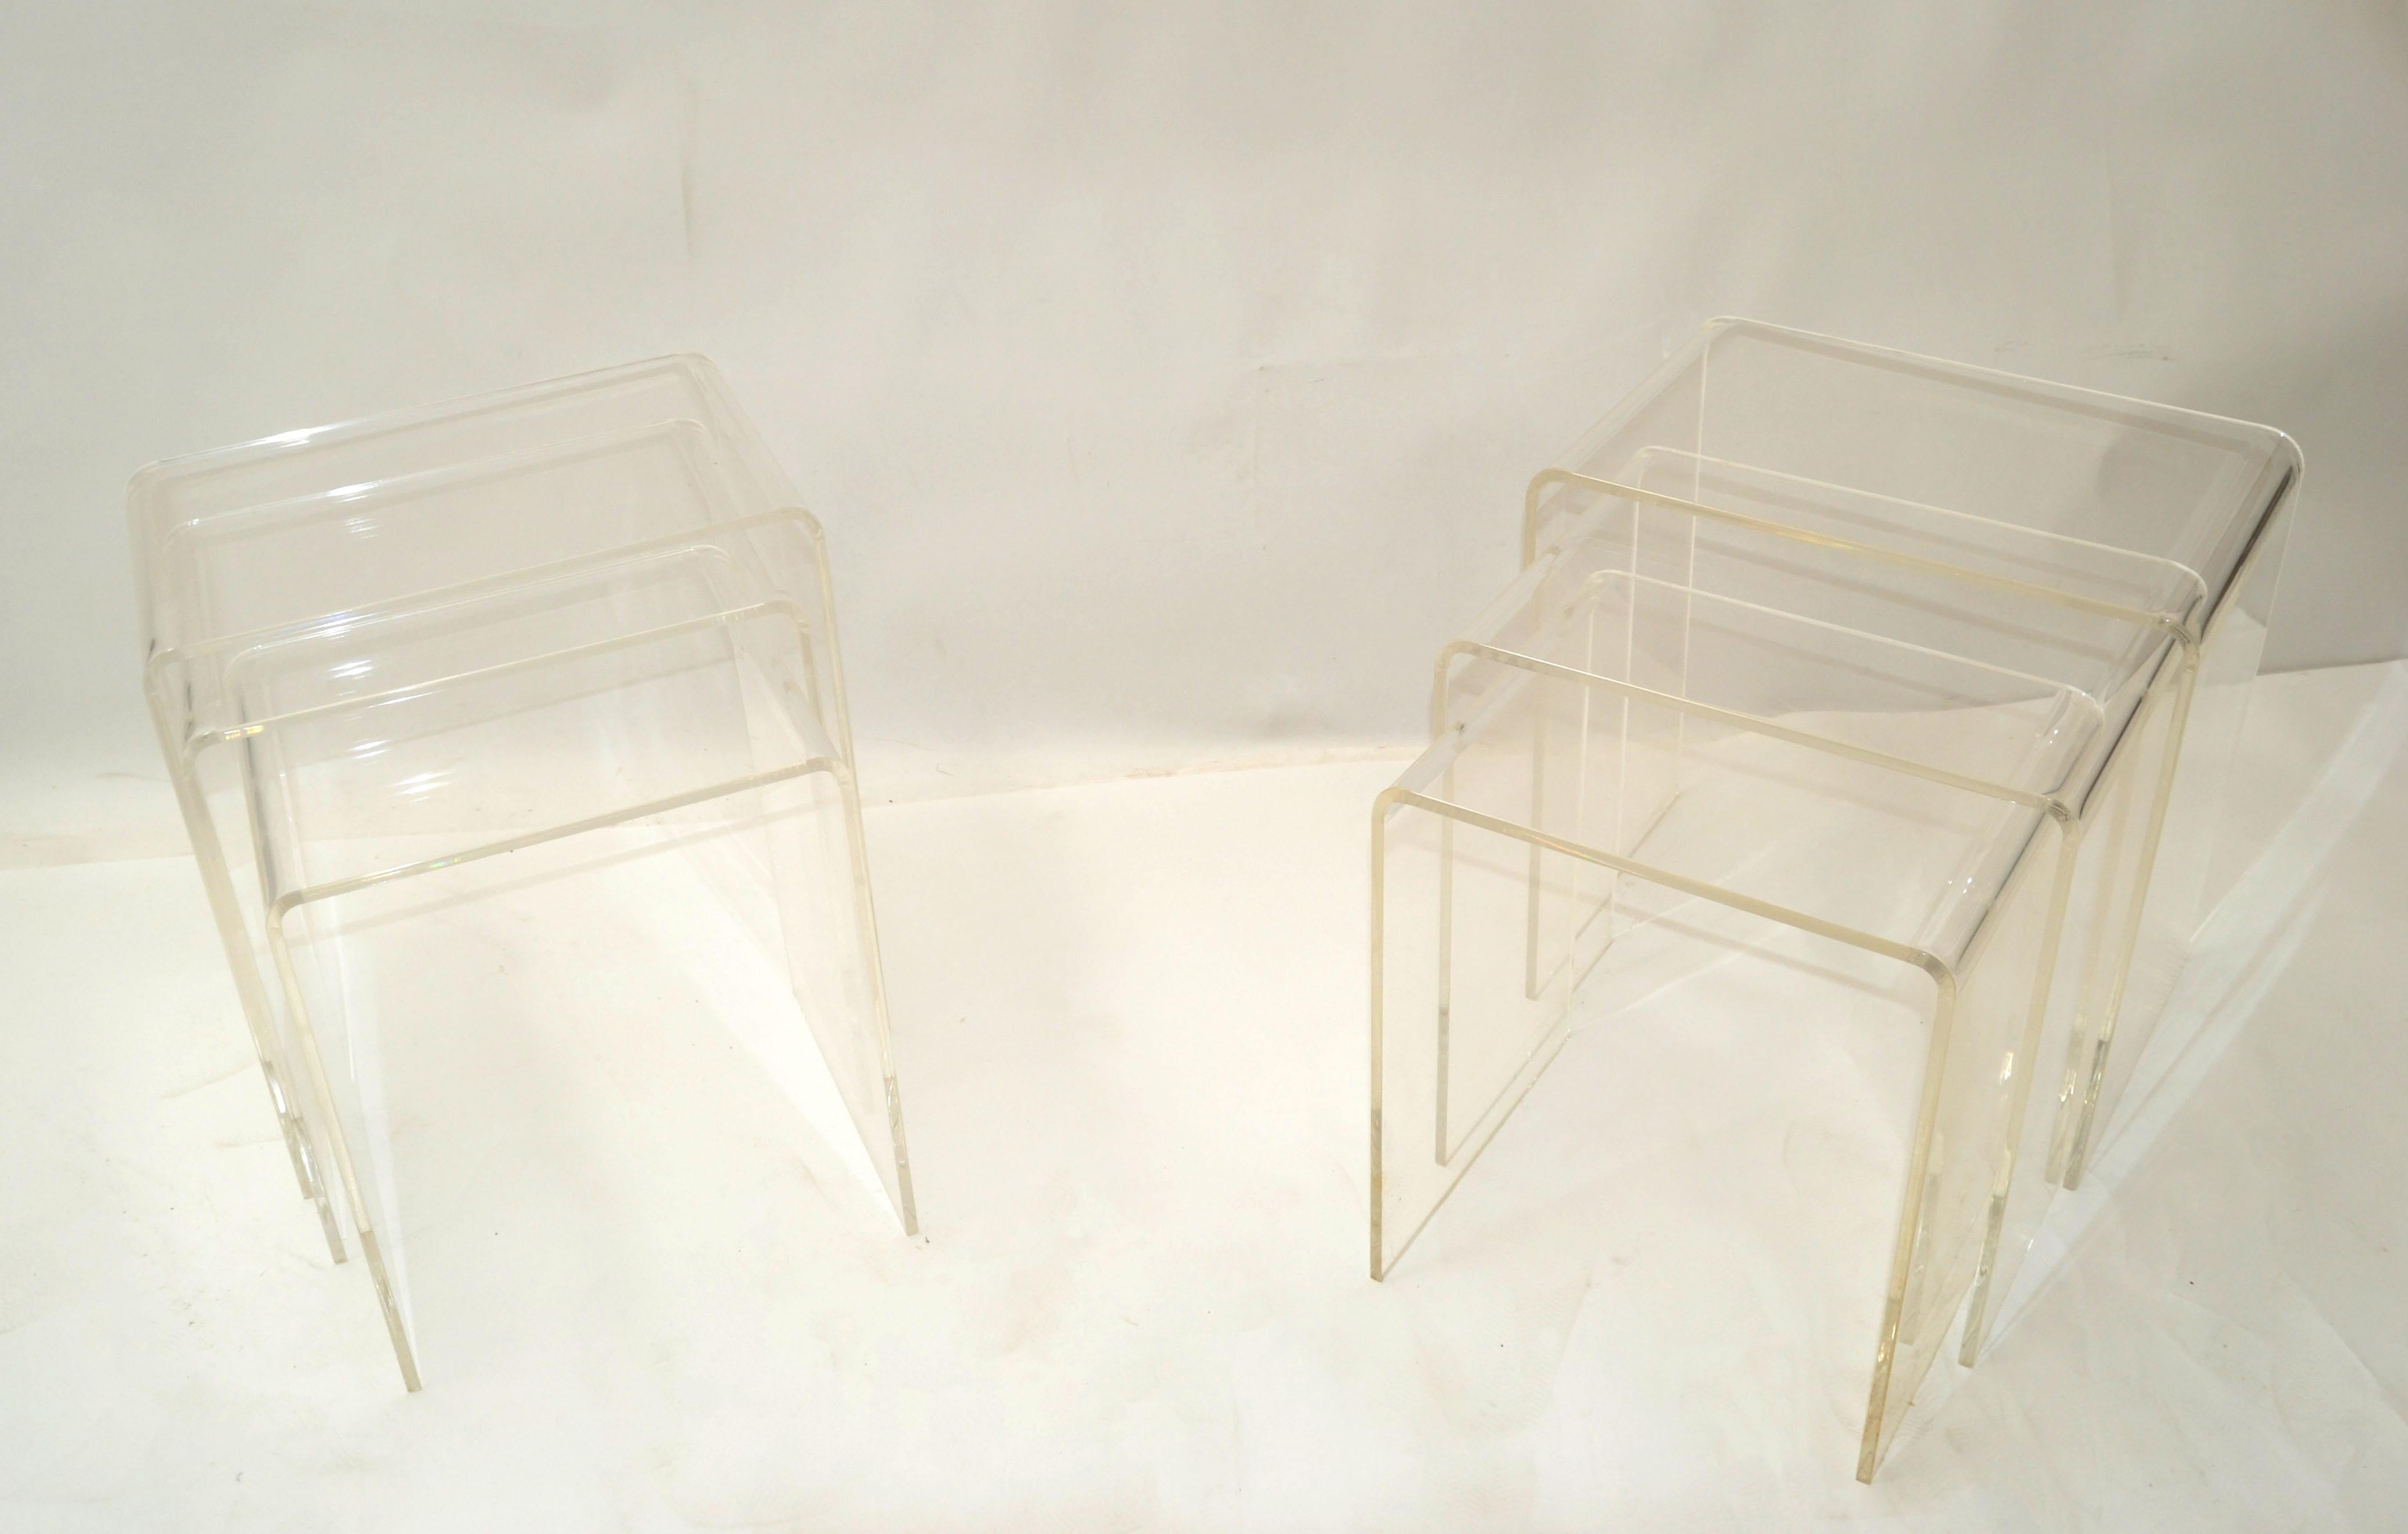 Pair of Lucite Waterfall Nesting Tables / Stacking Tables, Stools, Set of 3 For Sale 6